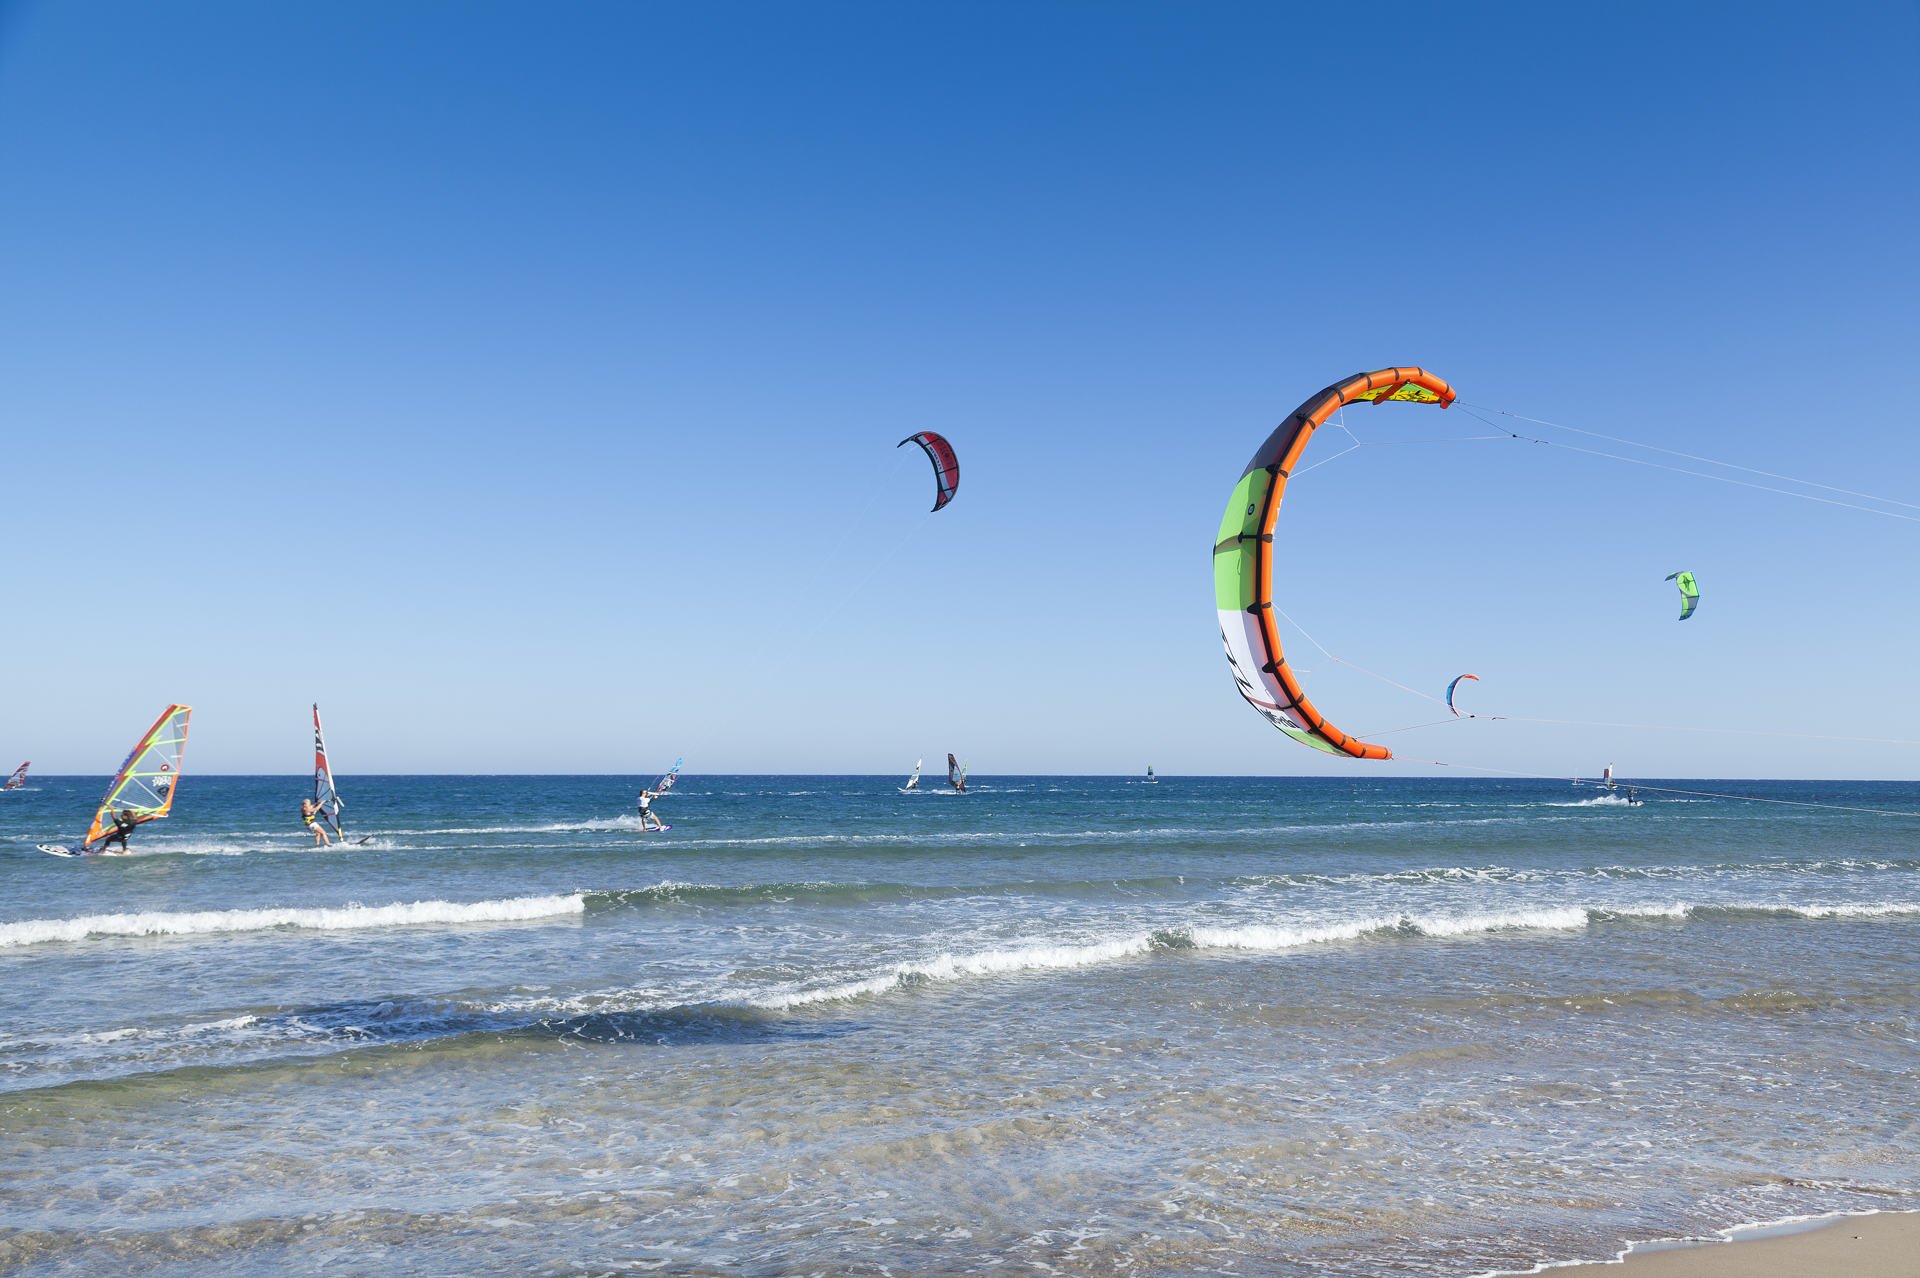 Kite surfers paradise in Rhodes